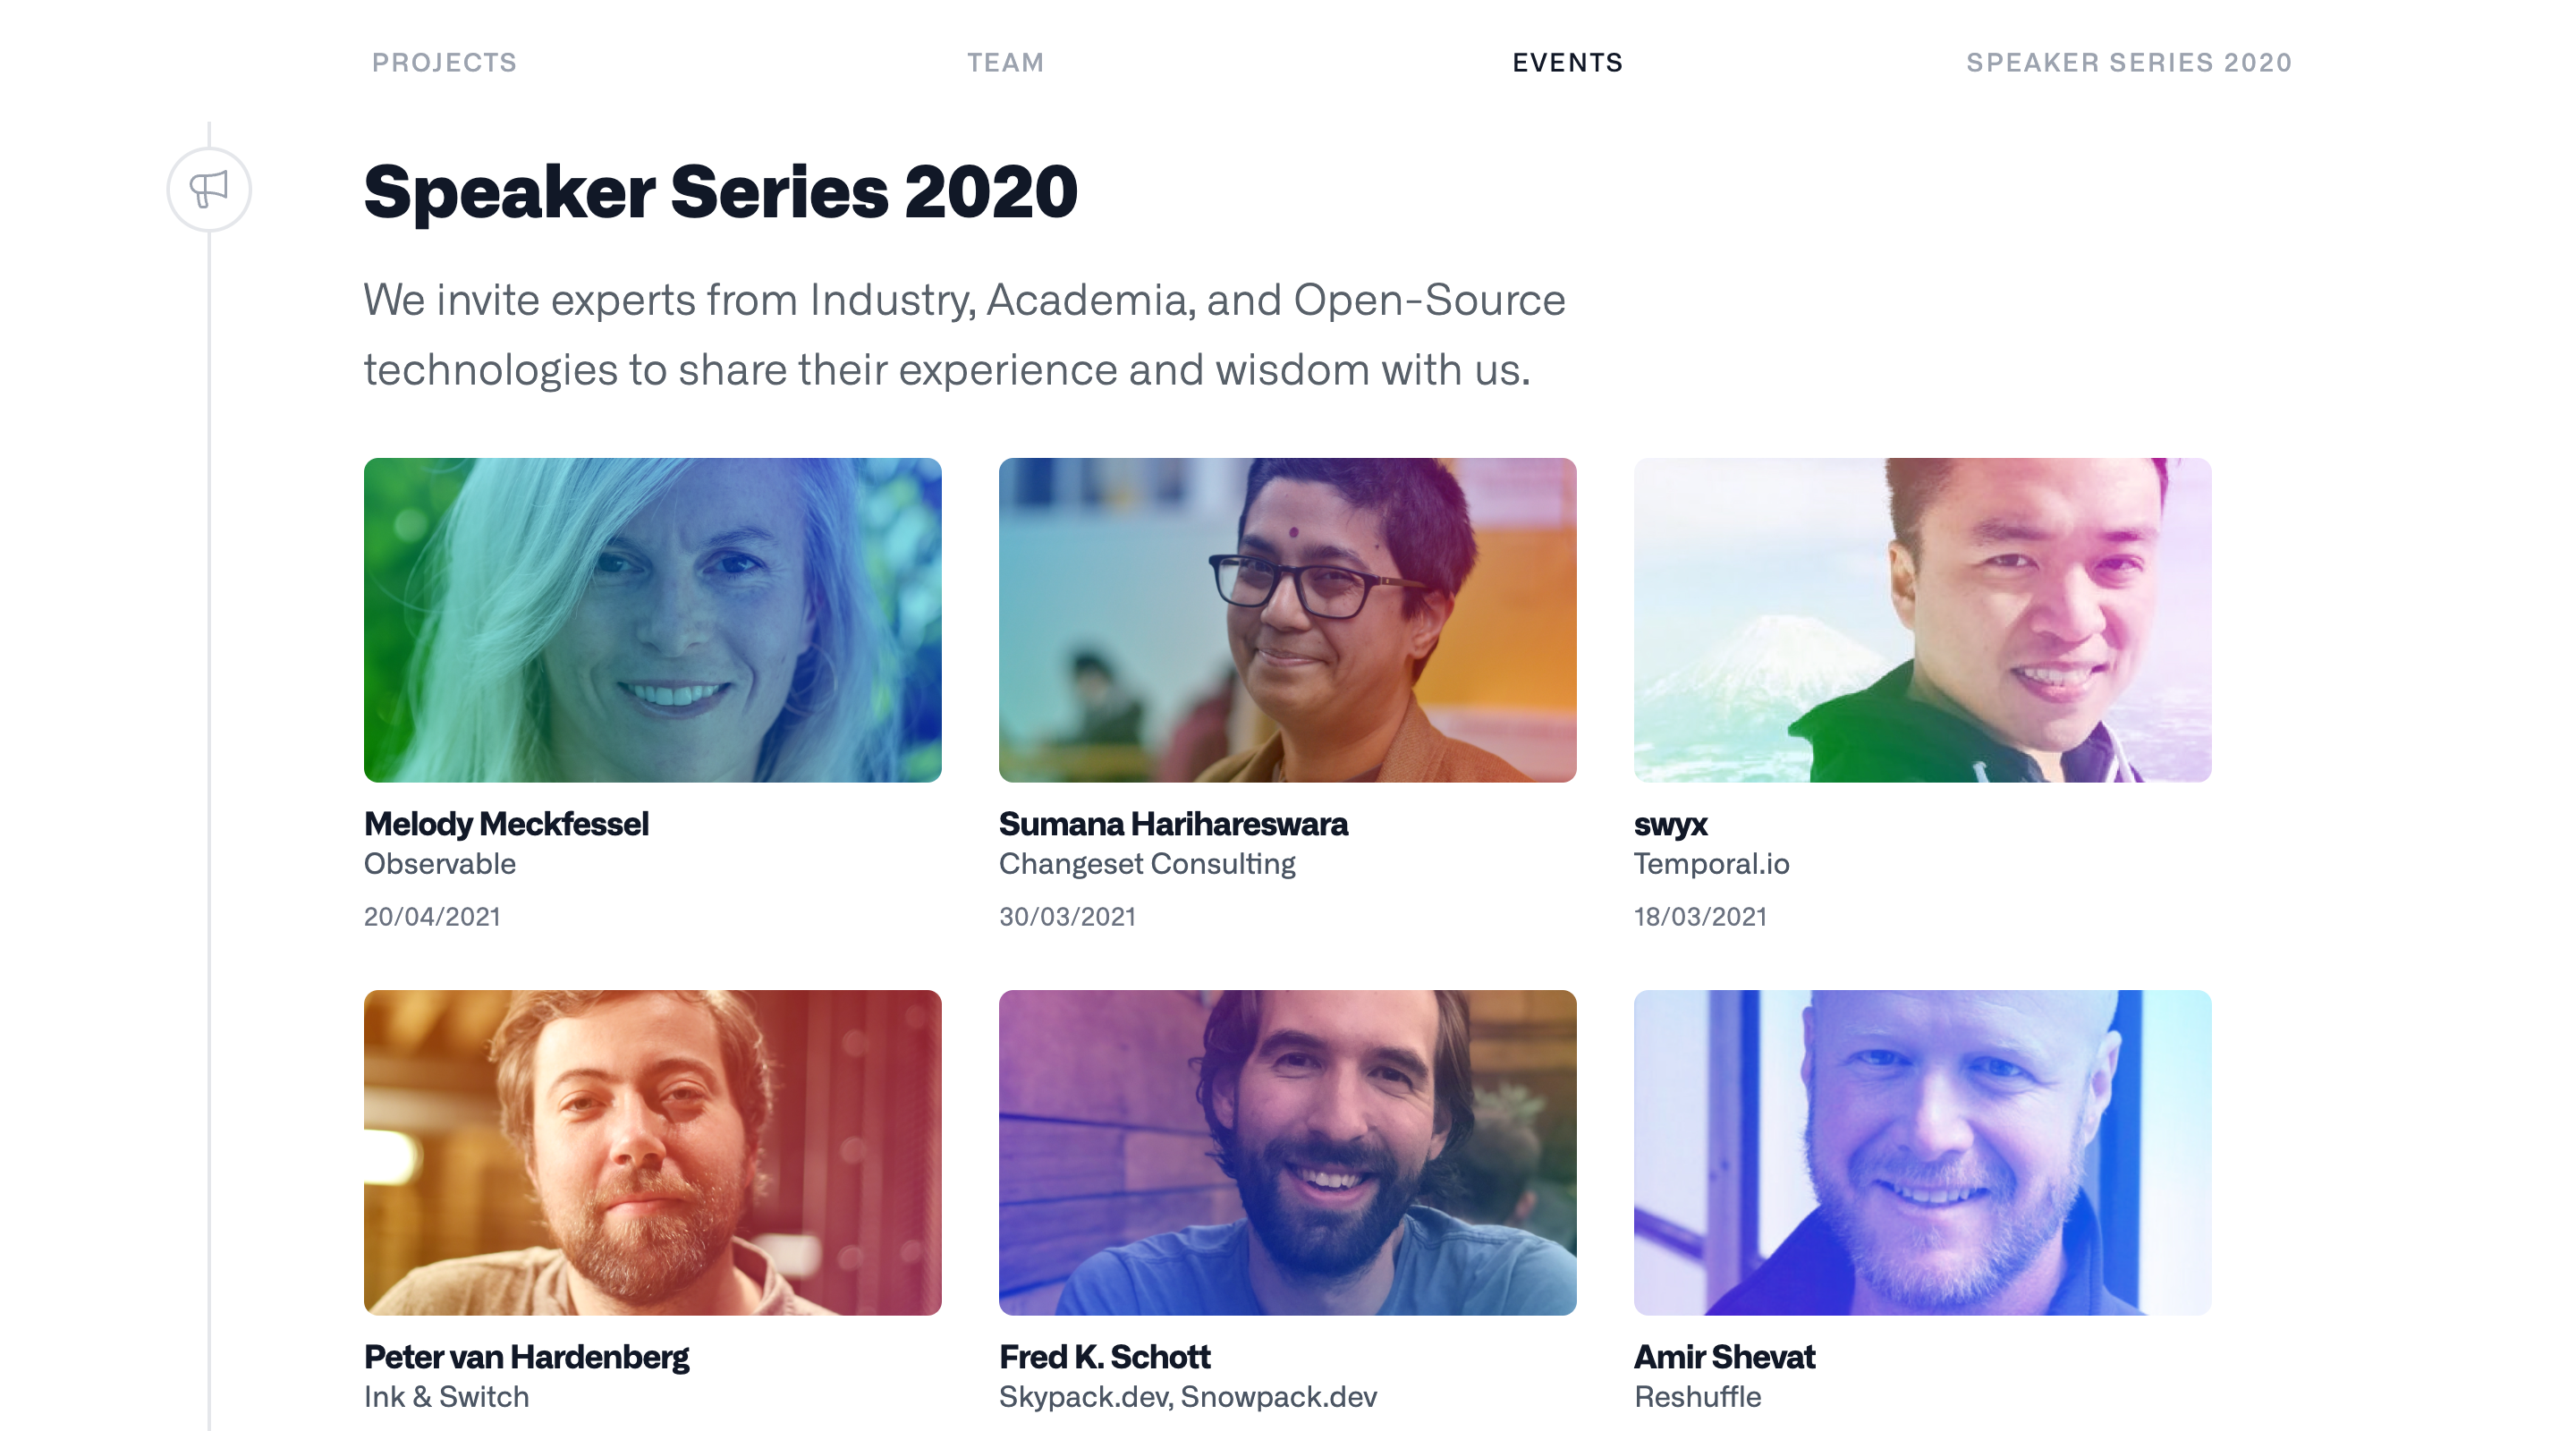 Screenshot of the ‘Speakers Series 2020’ section of the GitHub Next website, with a 3-column grid showing profile images of past speakers with their name, company name, and the date they spoke listed below.